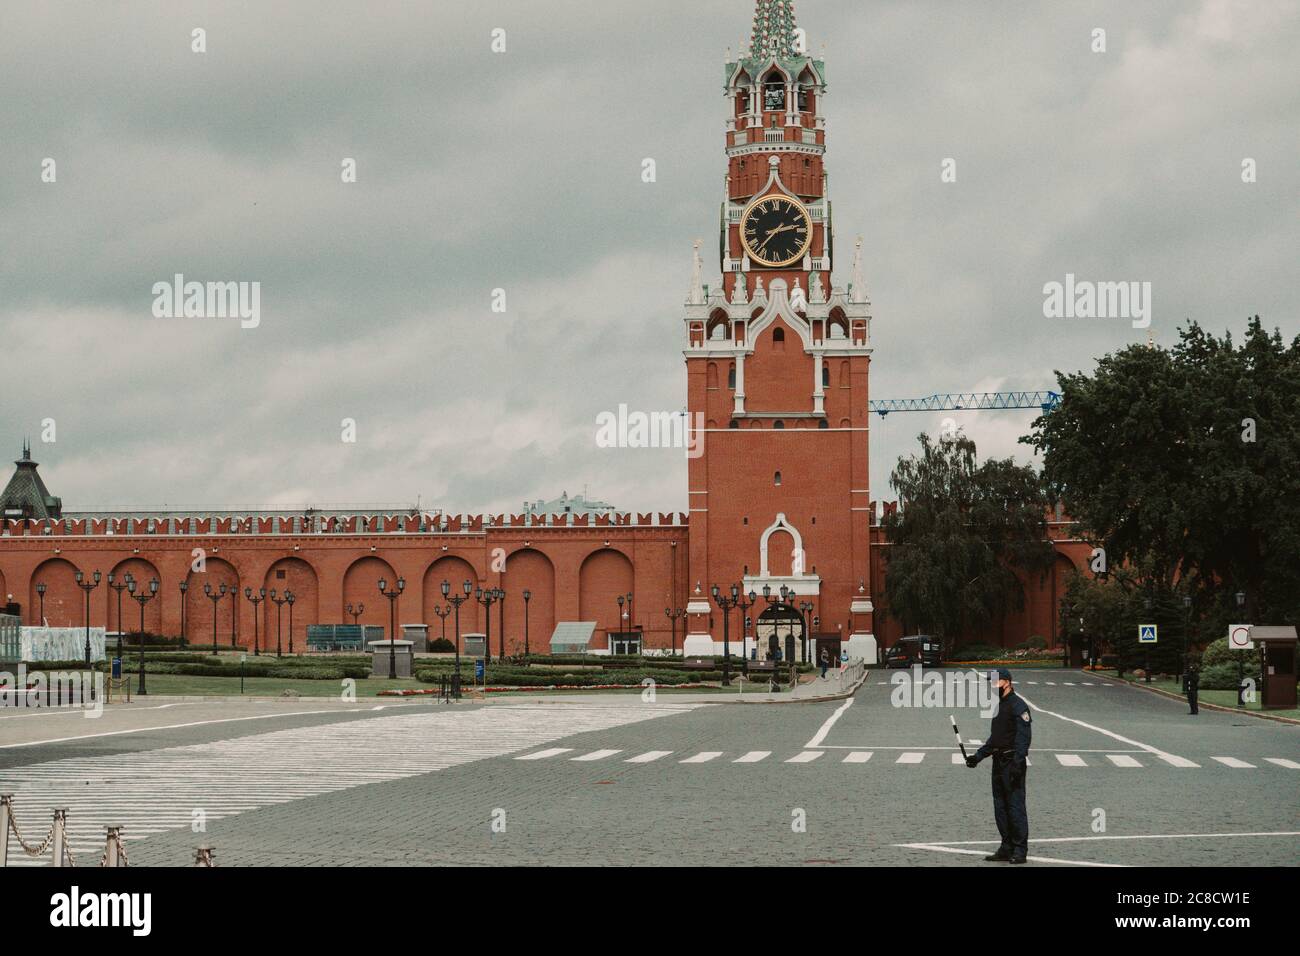 Spasskaya Tower and Federal Protective Service officer, Russia, Moscow Kremlin Stock Photo